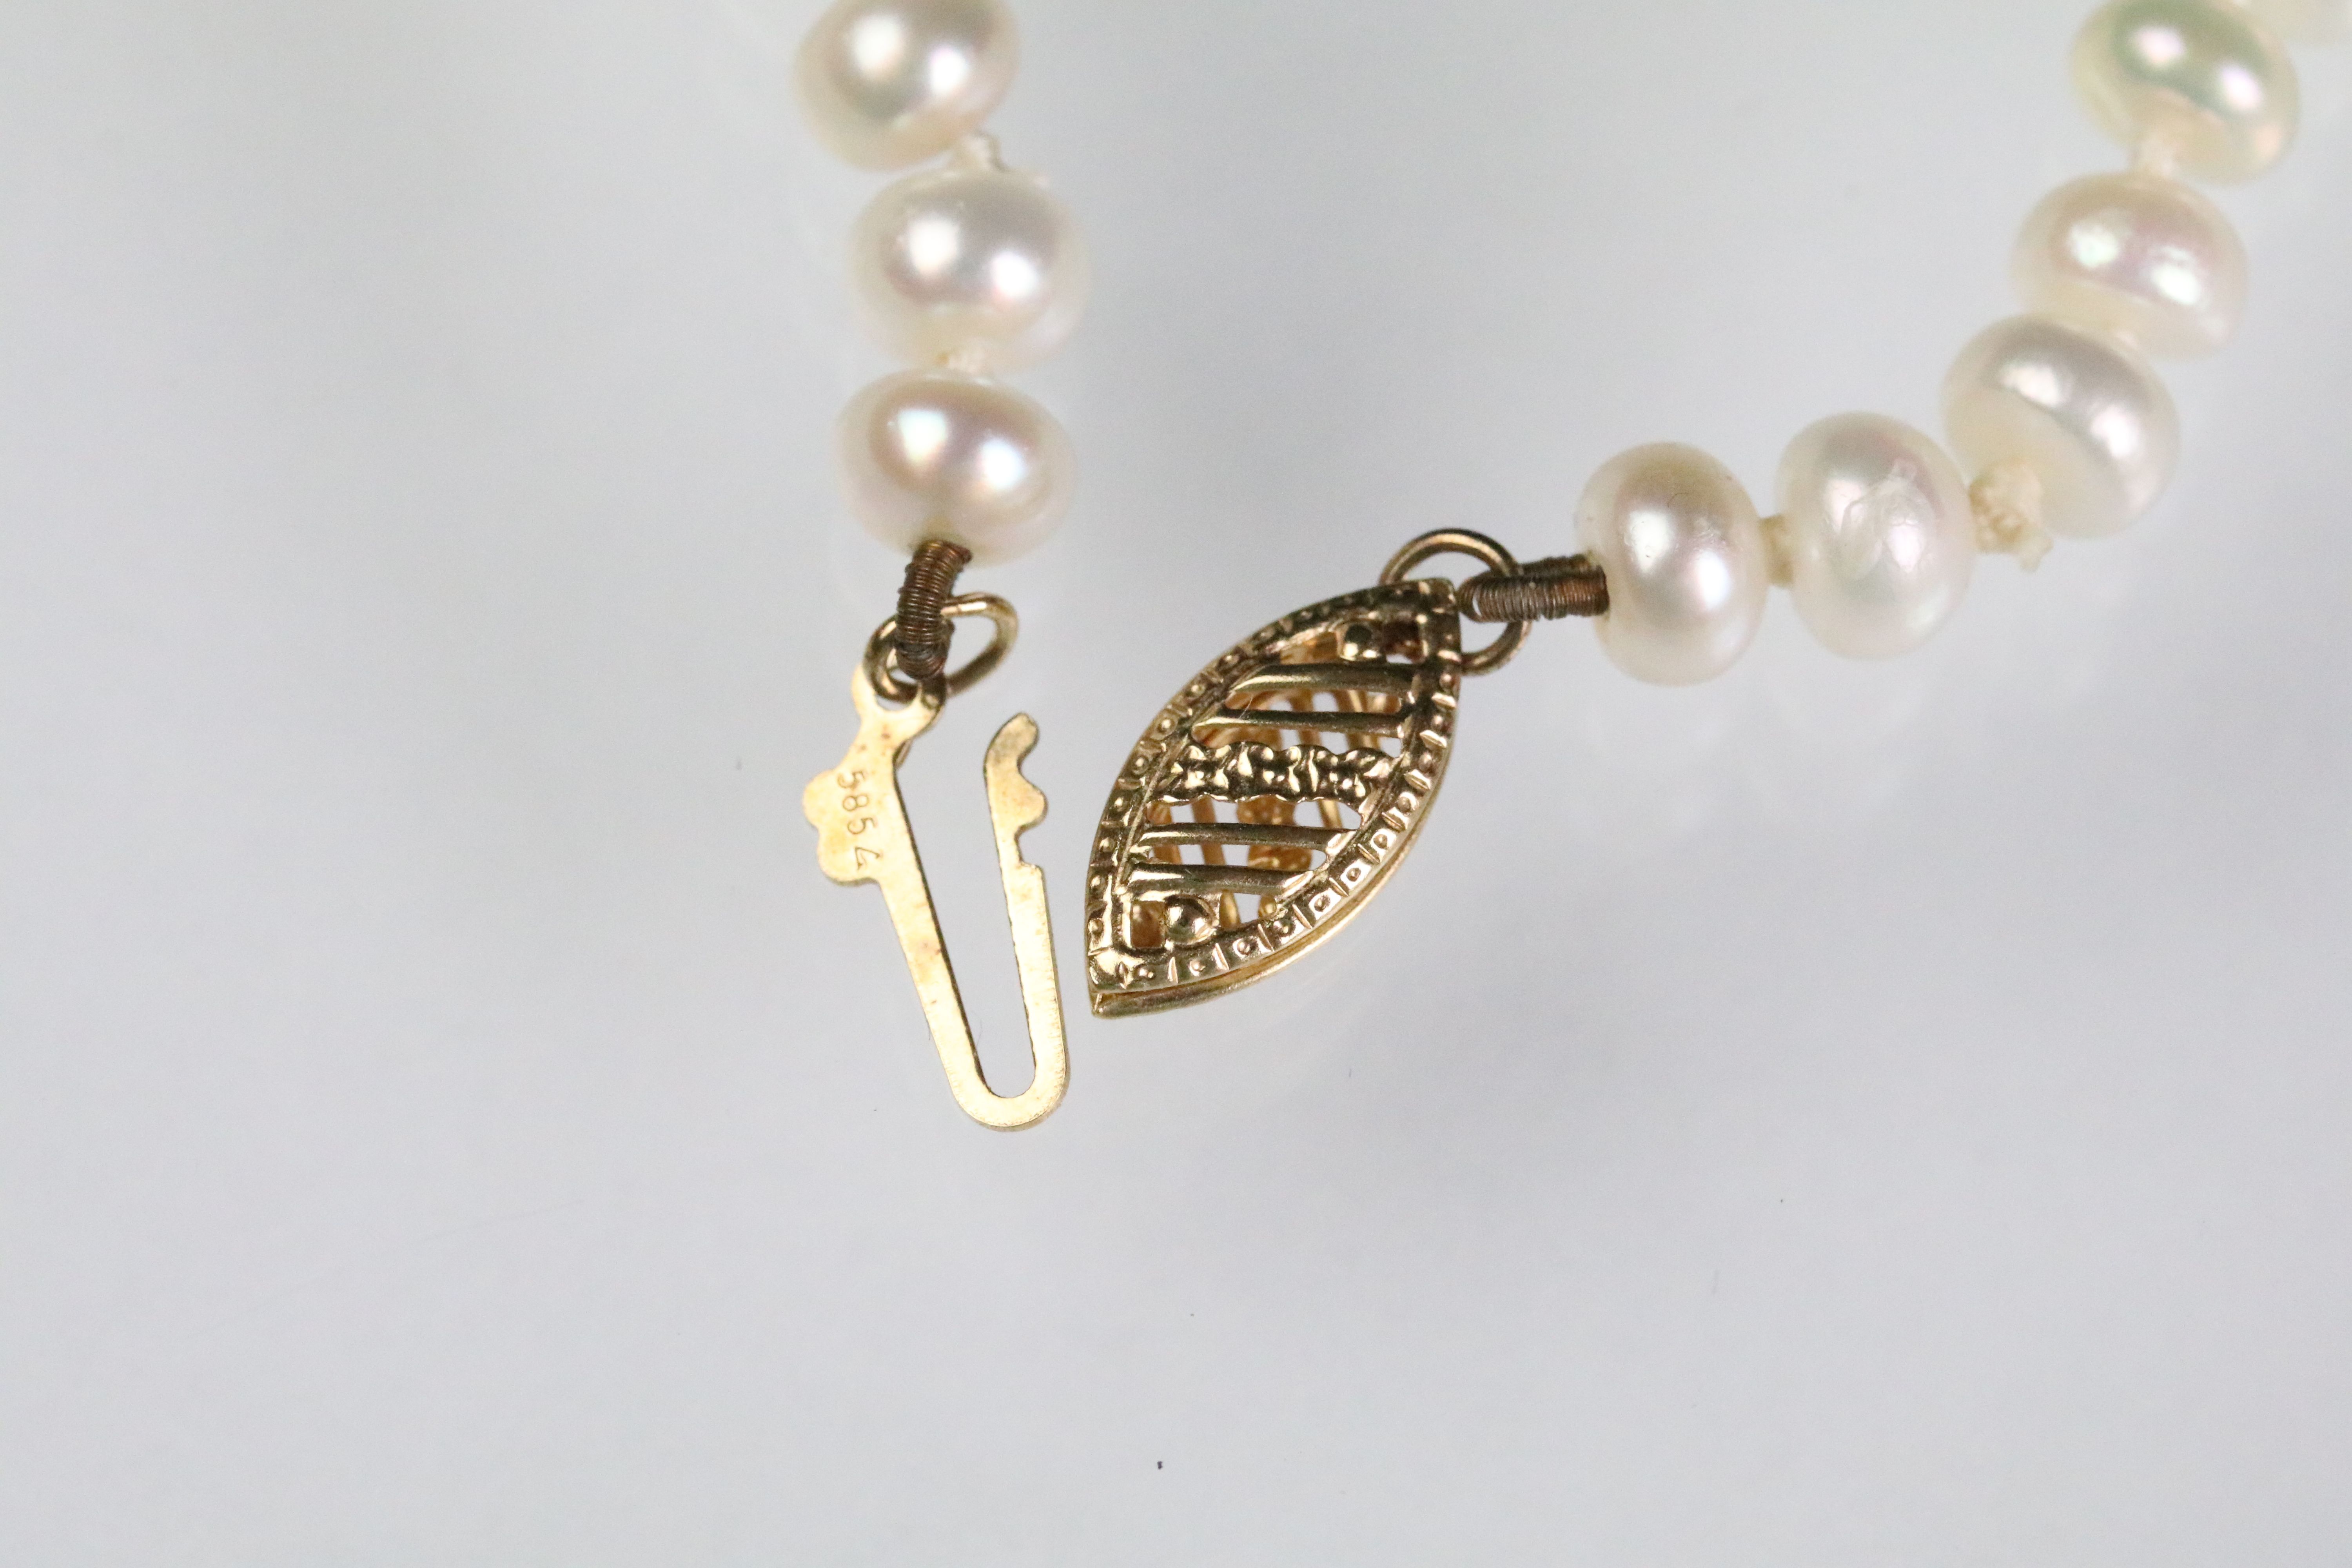 Cultured pearl necklace with a 14ct gold navette shaped clasp. Clasp marked 585. Measures 18 inches. - Image 4 of 4